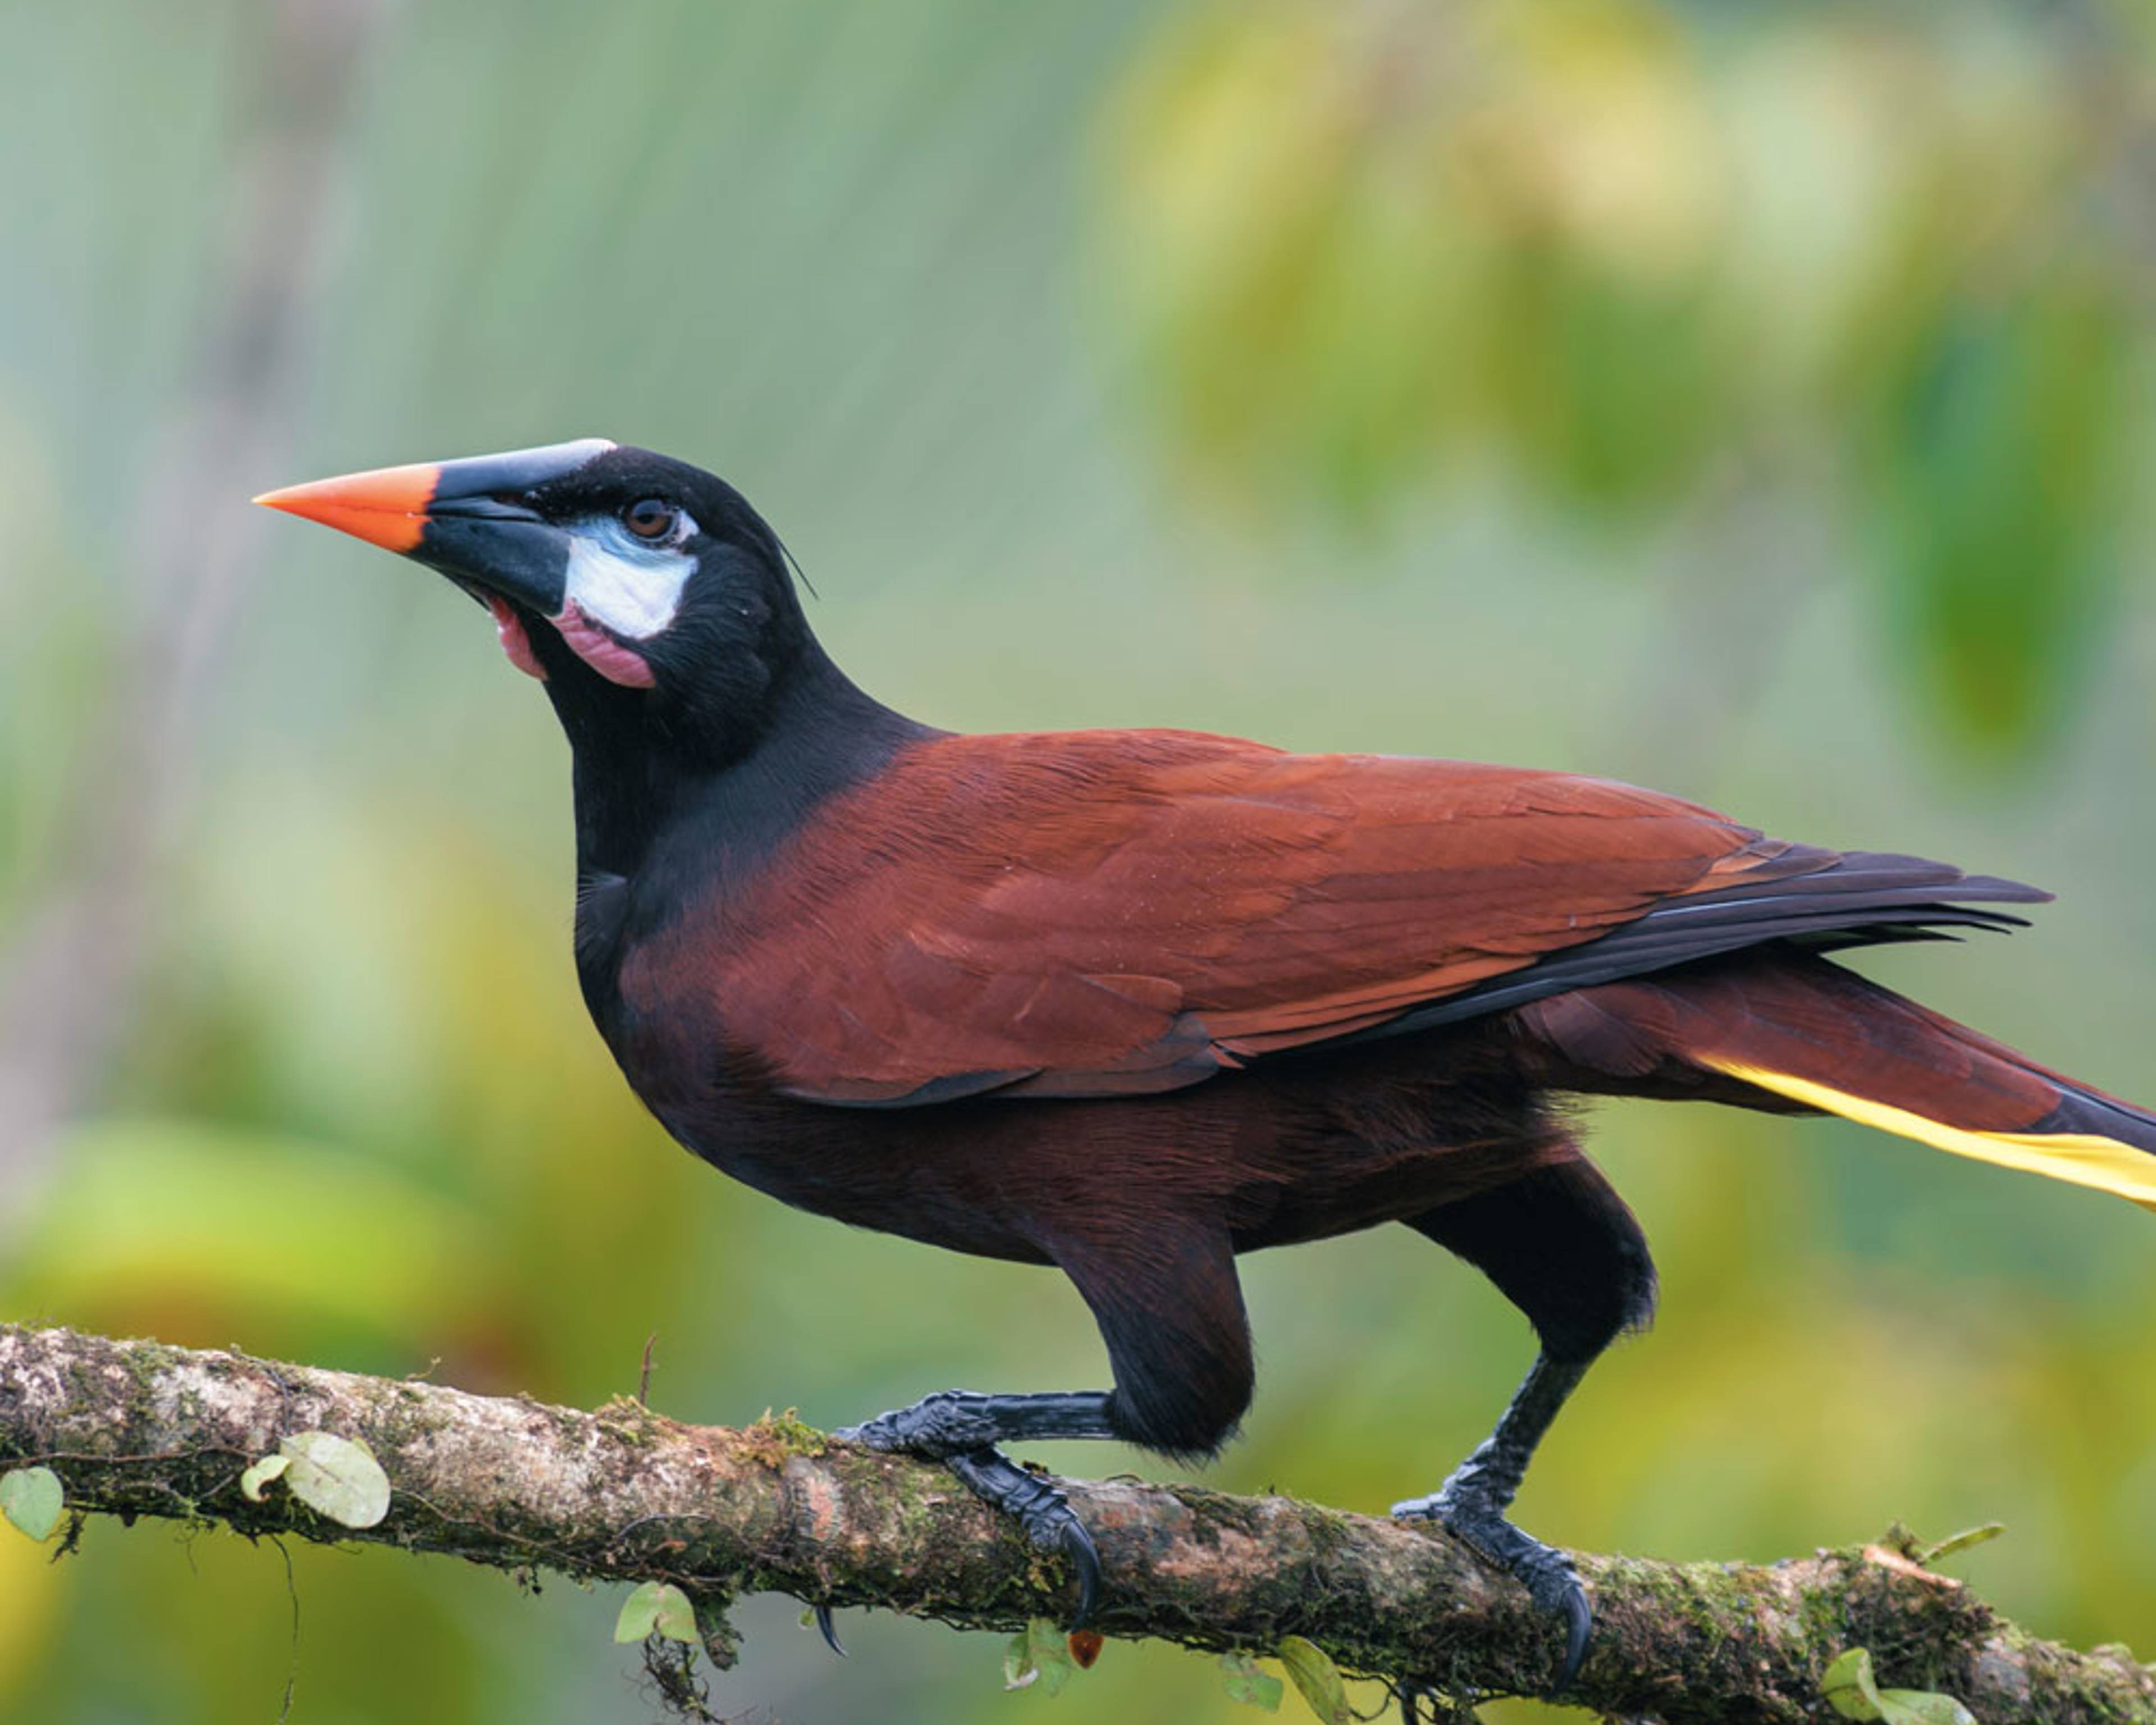 Birdwatching Tours in Costa Rica | Expert Local Guides